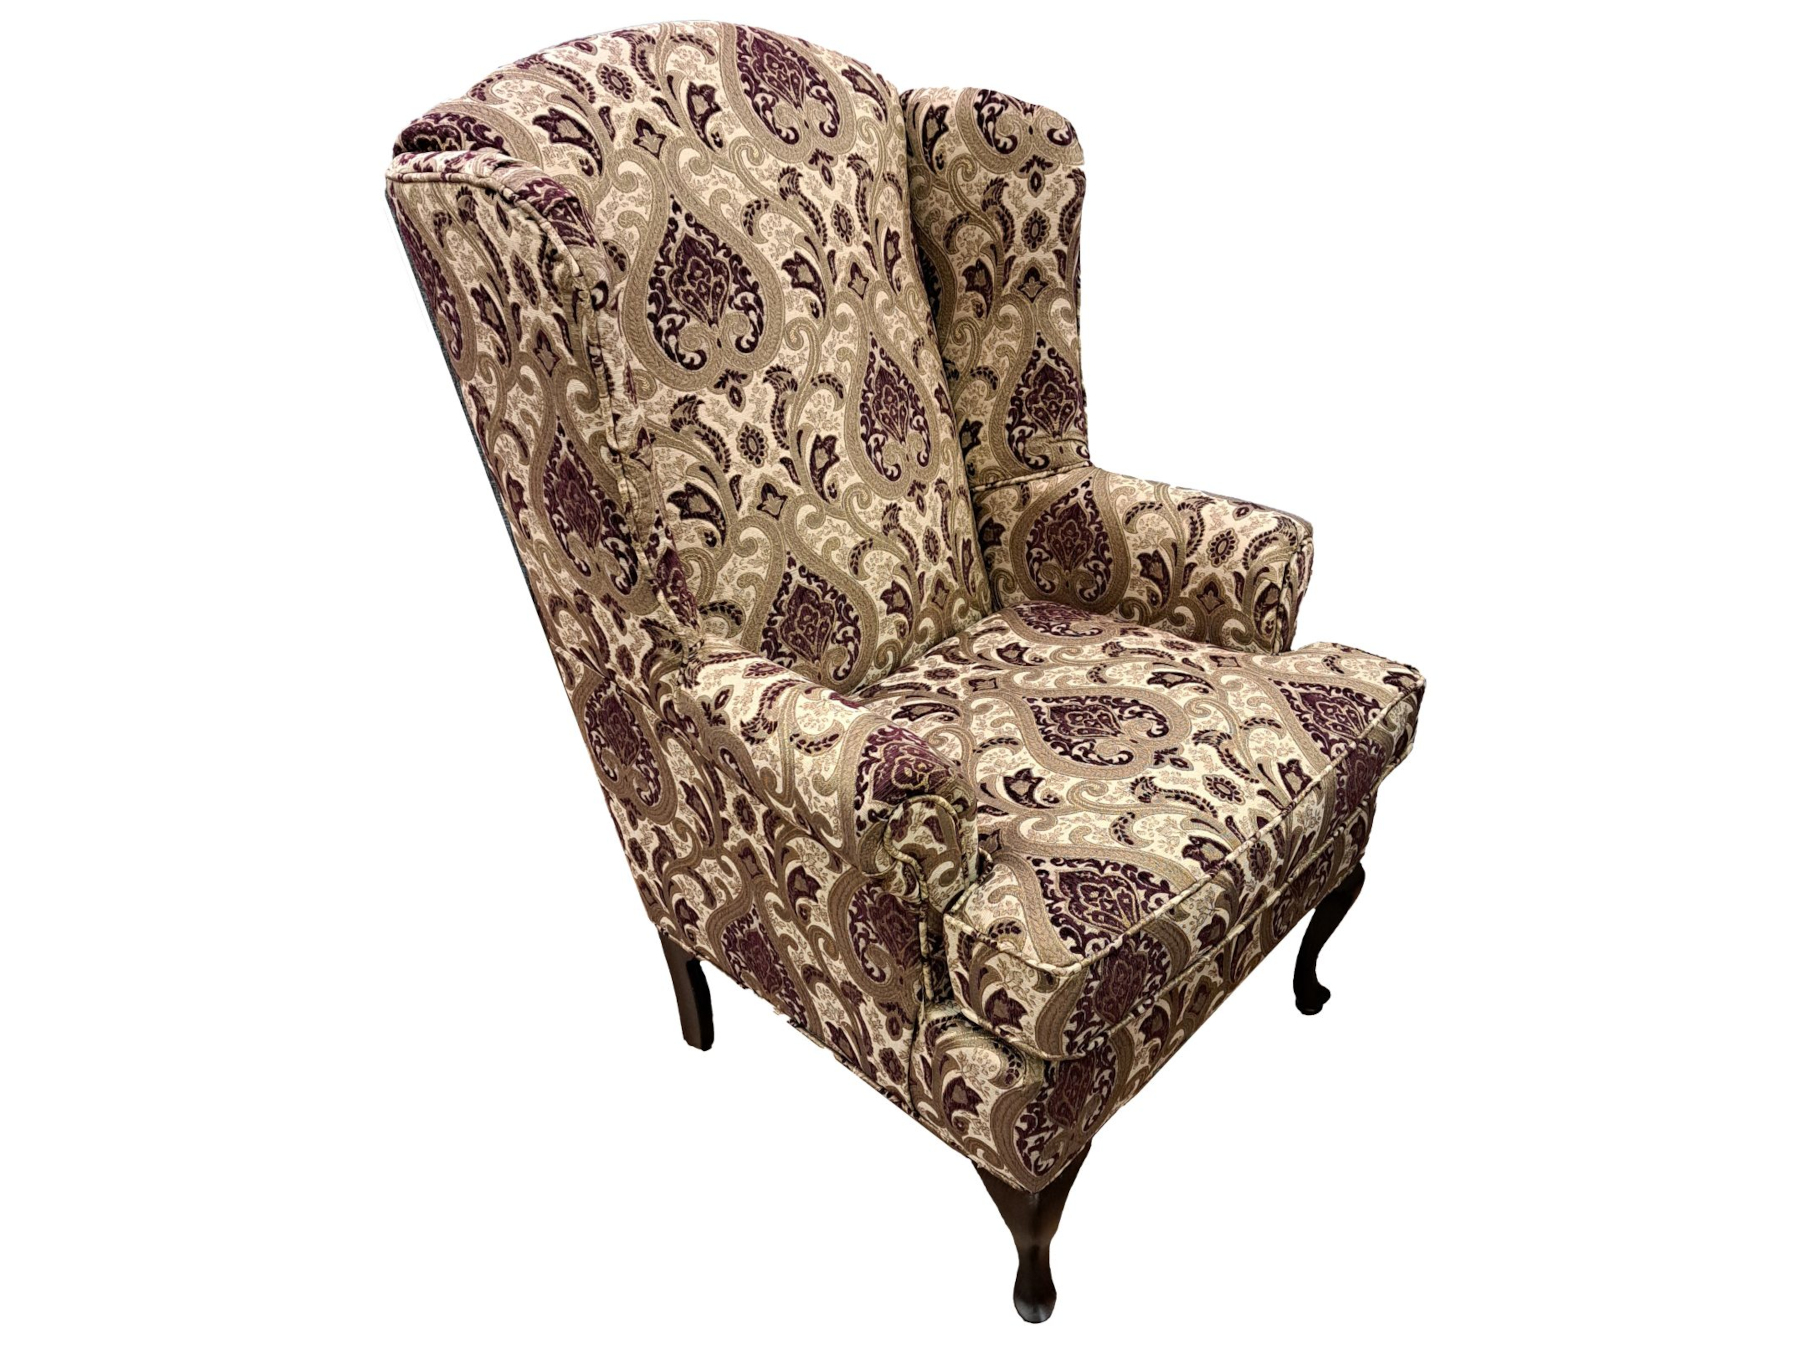 25657 - wing - back - chair - LH2200 - monti - christo - wine